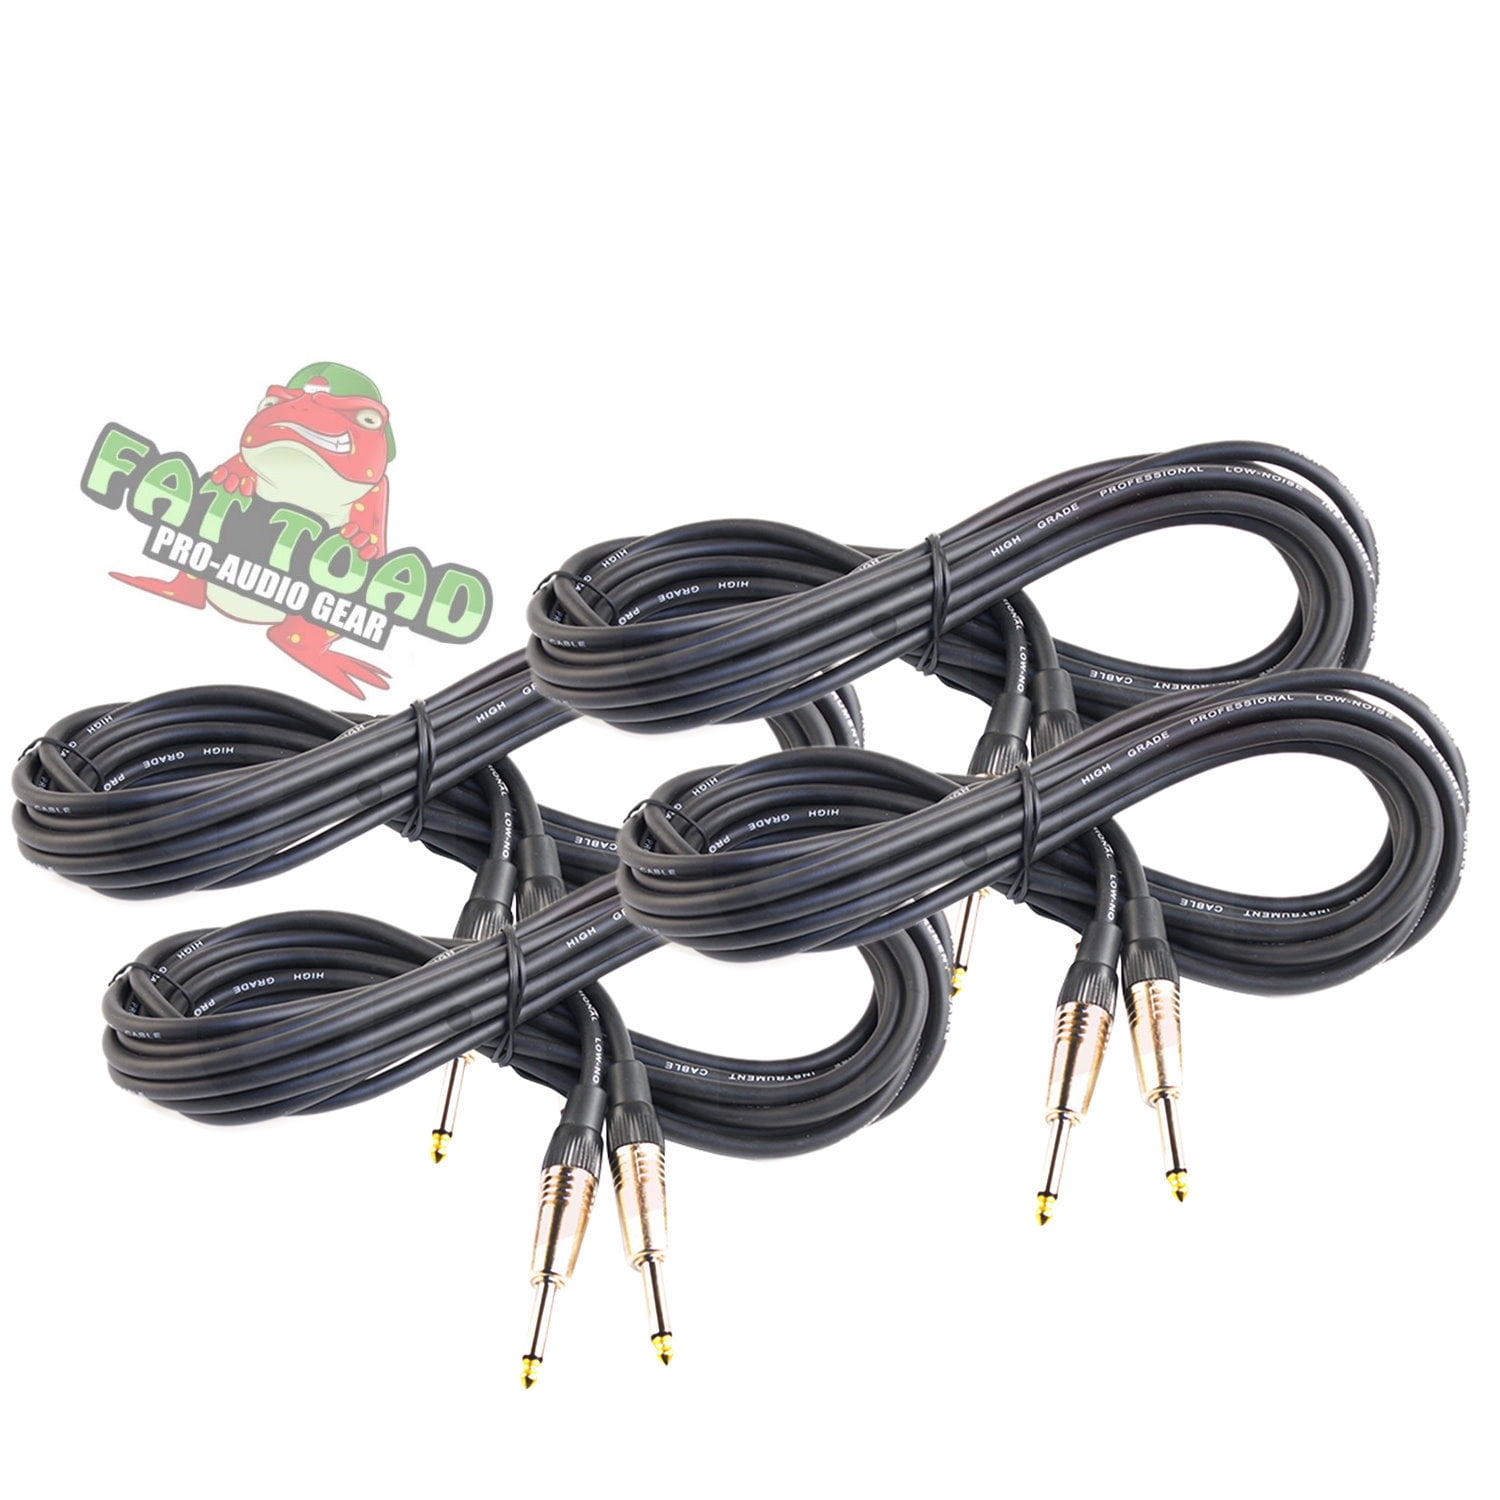 Keyboards and Music Sound Recording Studio|Shielded 20 AWG Patch Conductor Bass Instrument Cable by Fat Toad|20 FT 1/4 Inch Straight-End Wires for Electric or Acoustic Guitar Guitar Cords 6 Pack 